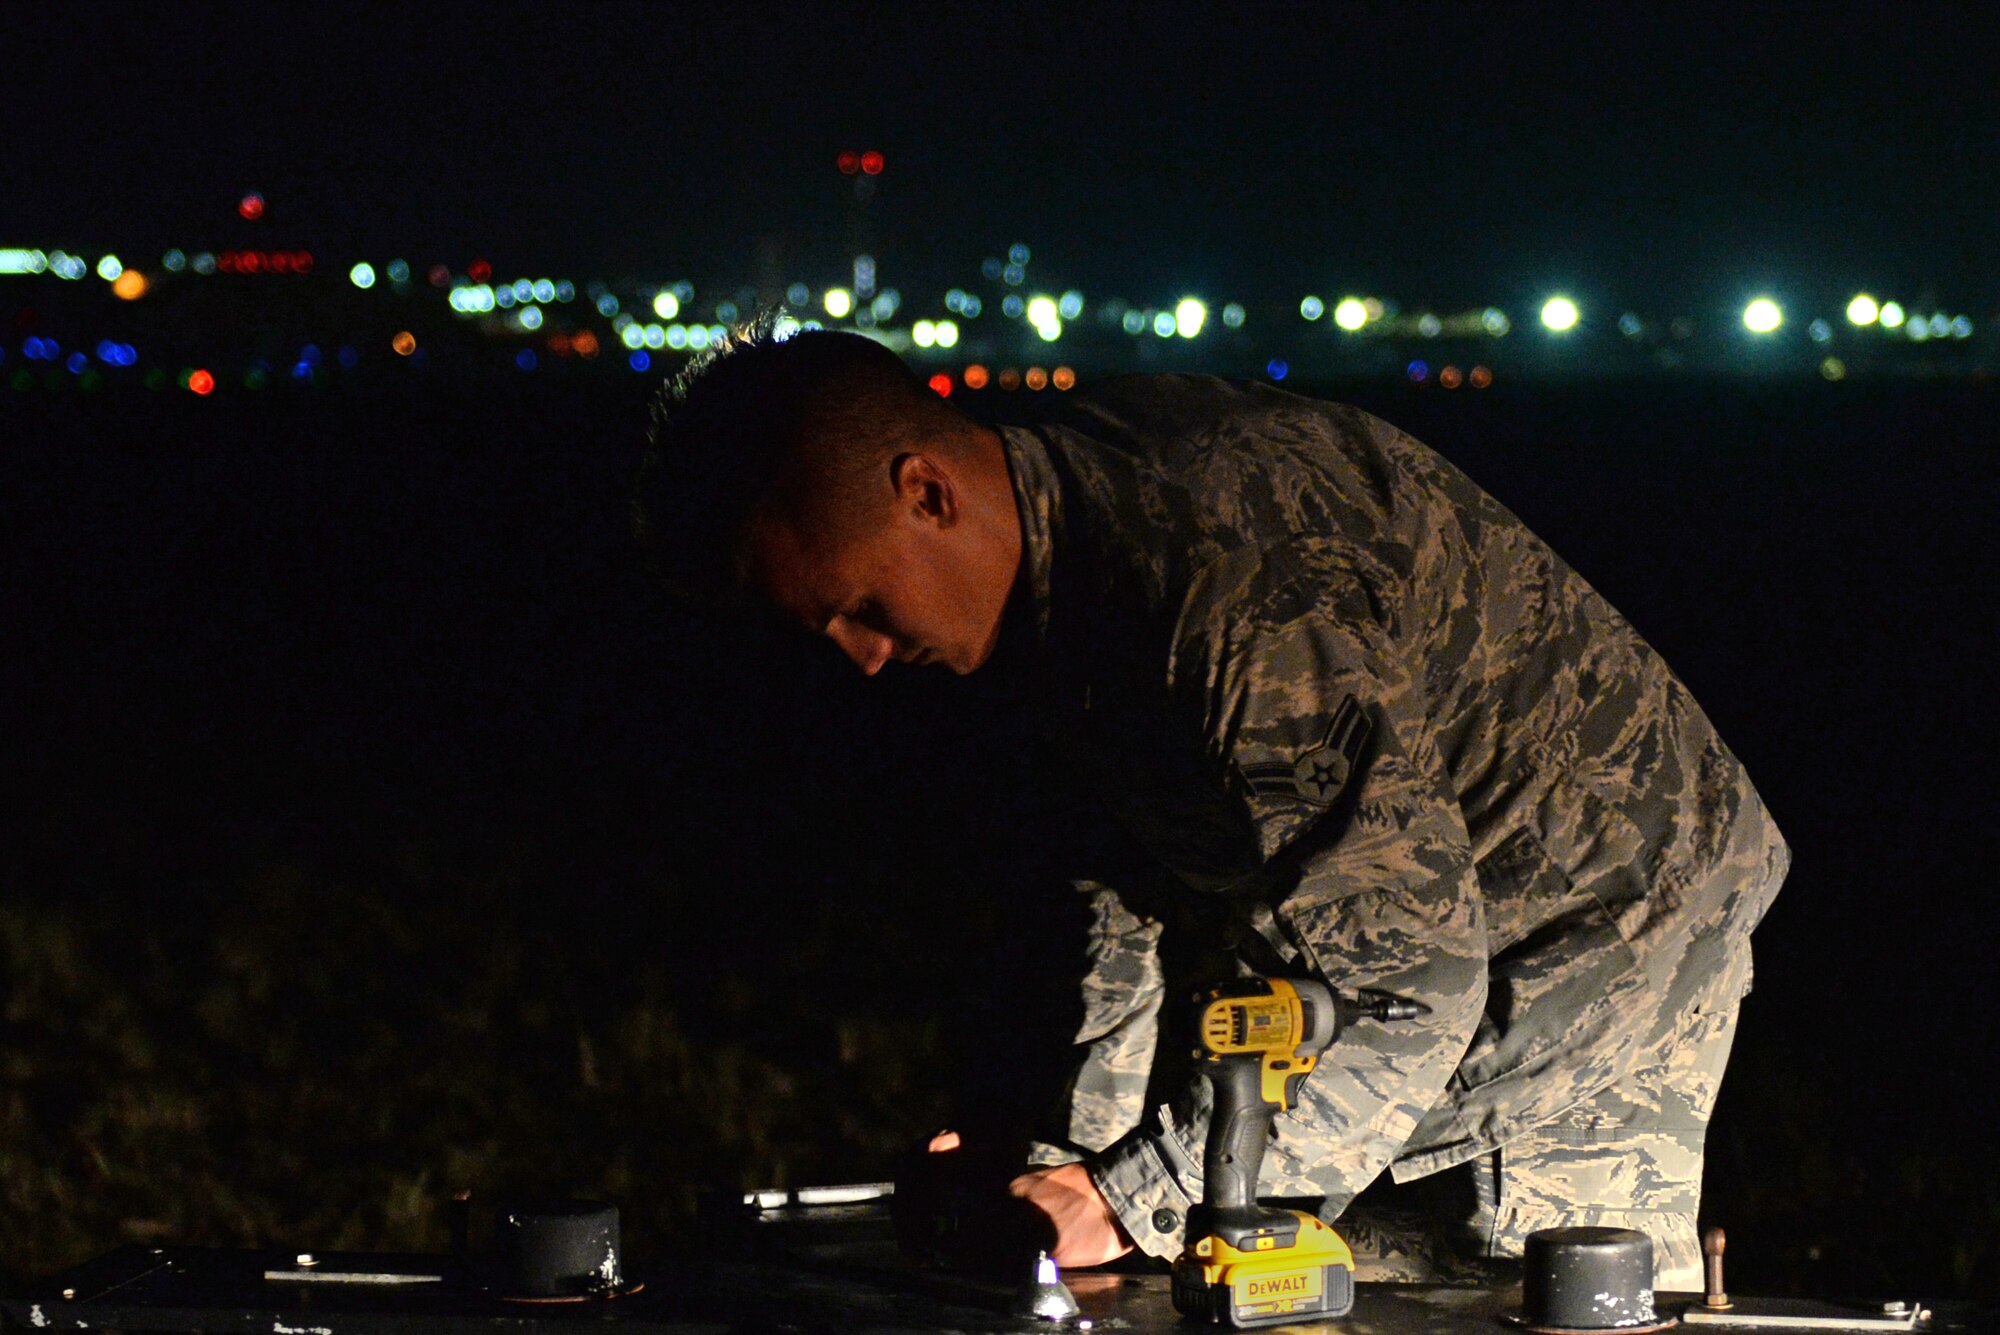 U.S. Air Force Airman 1st Class Ryan Muller, 36th Civil Engineering Squadron electrician, changes a light on the flightline May 16, 2017, at Andersen Air Force Base, Guam. The 36th CES is responsible for all facilities, infrastructure and two airfields with over 450 Airmen making it the largest squadron on Andersen AFB. (U.S. Air Force photo by Airman 1st Class Gerald R. Willis)